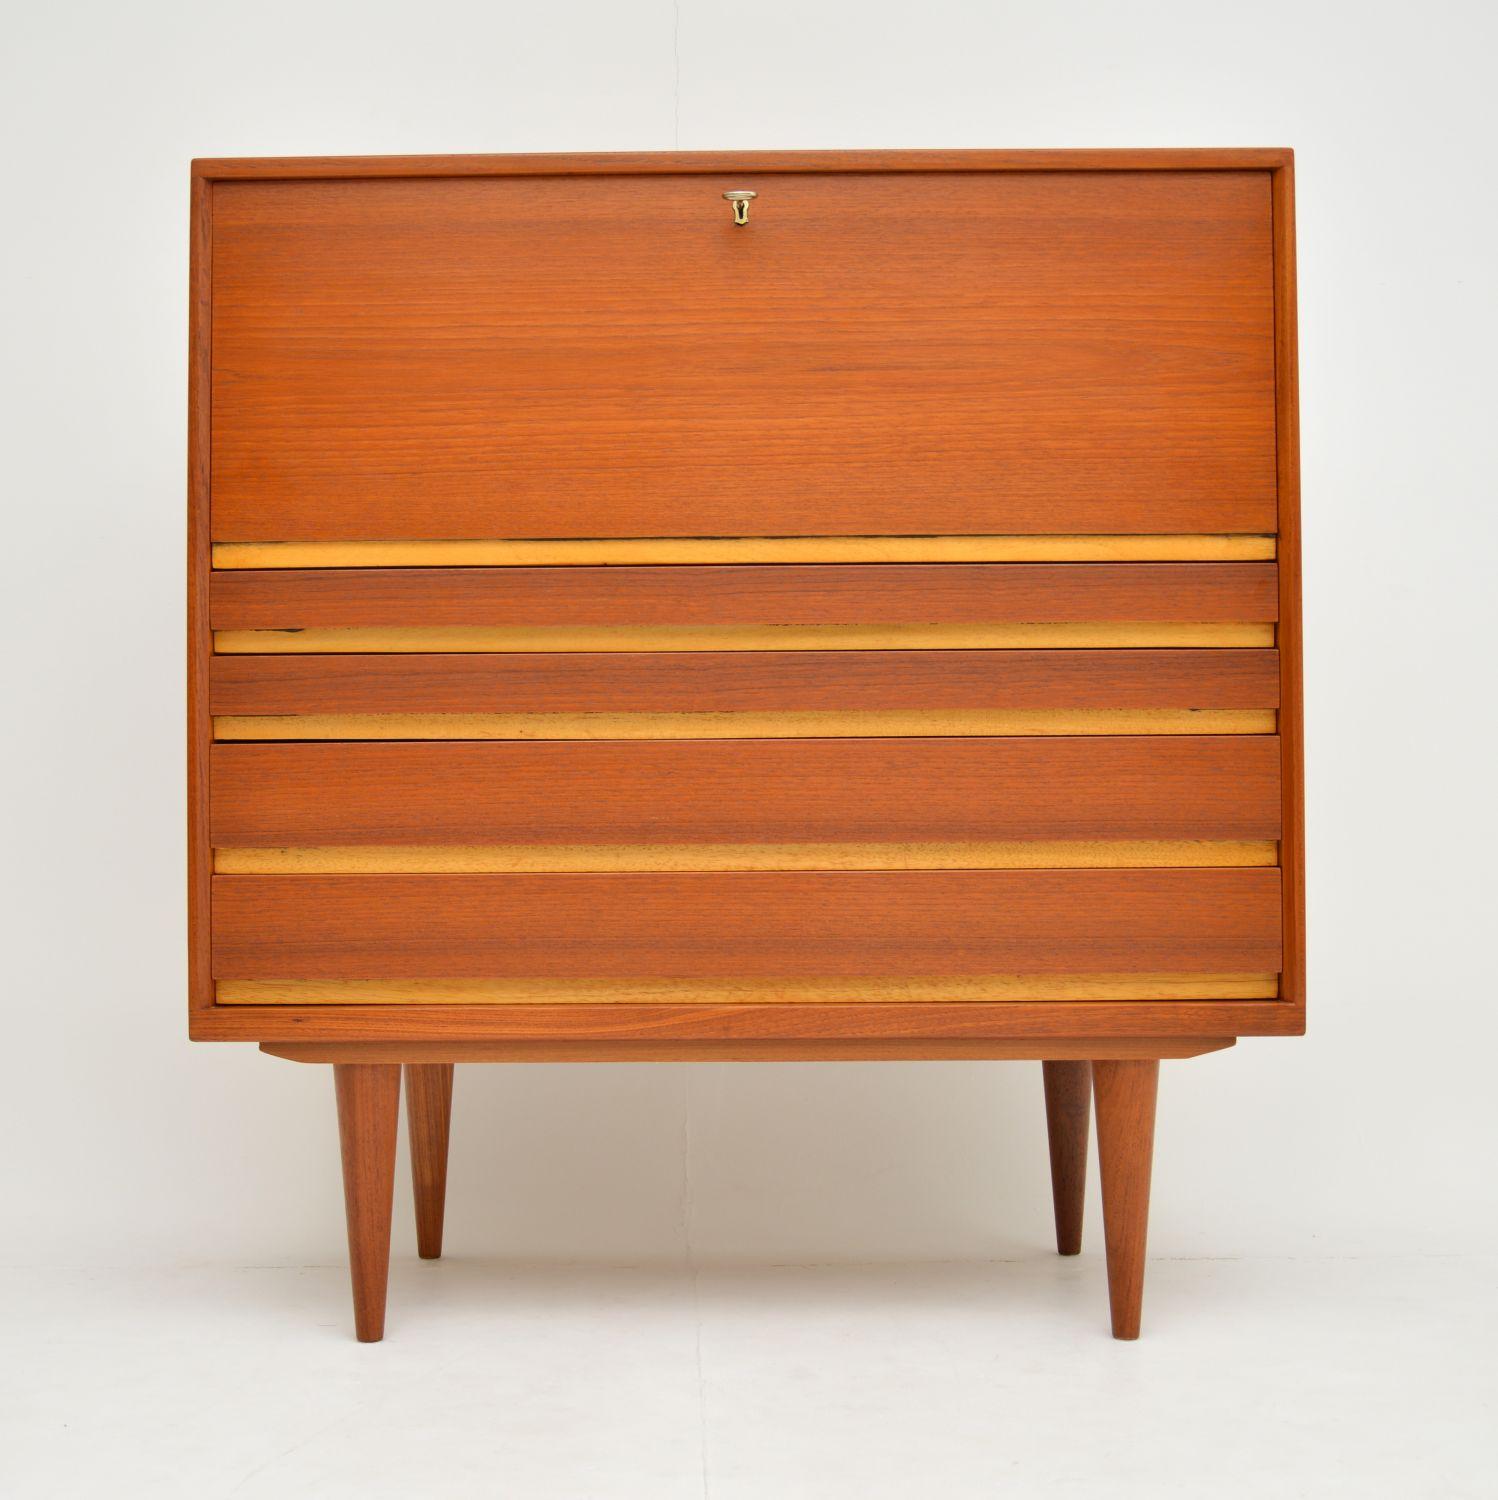 A stunning and very practical vintage Danish writing bureau in teak. This dates from the 1960s, it is of amazing quality has lots nice features.

The top drops down to reveal a large writing area with pigeon hole storage. The lower half consist of